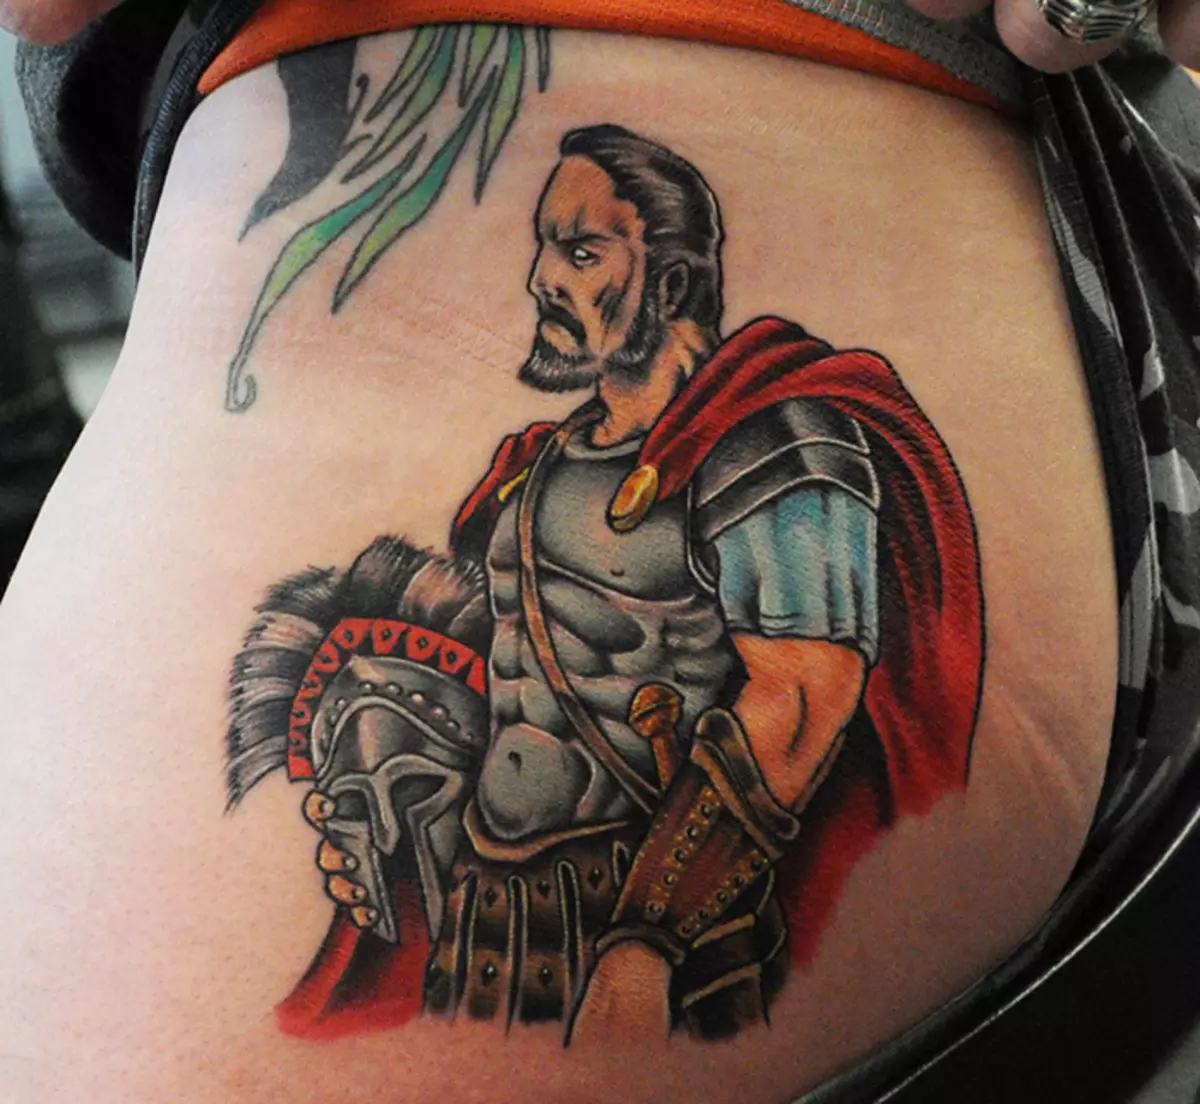 Roman tattoo: Tattoo with a legionnaire of ancient Rome, sketches and meaning, God Mars, sign of the Legion and Helmet, other tattoo 299_20